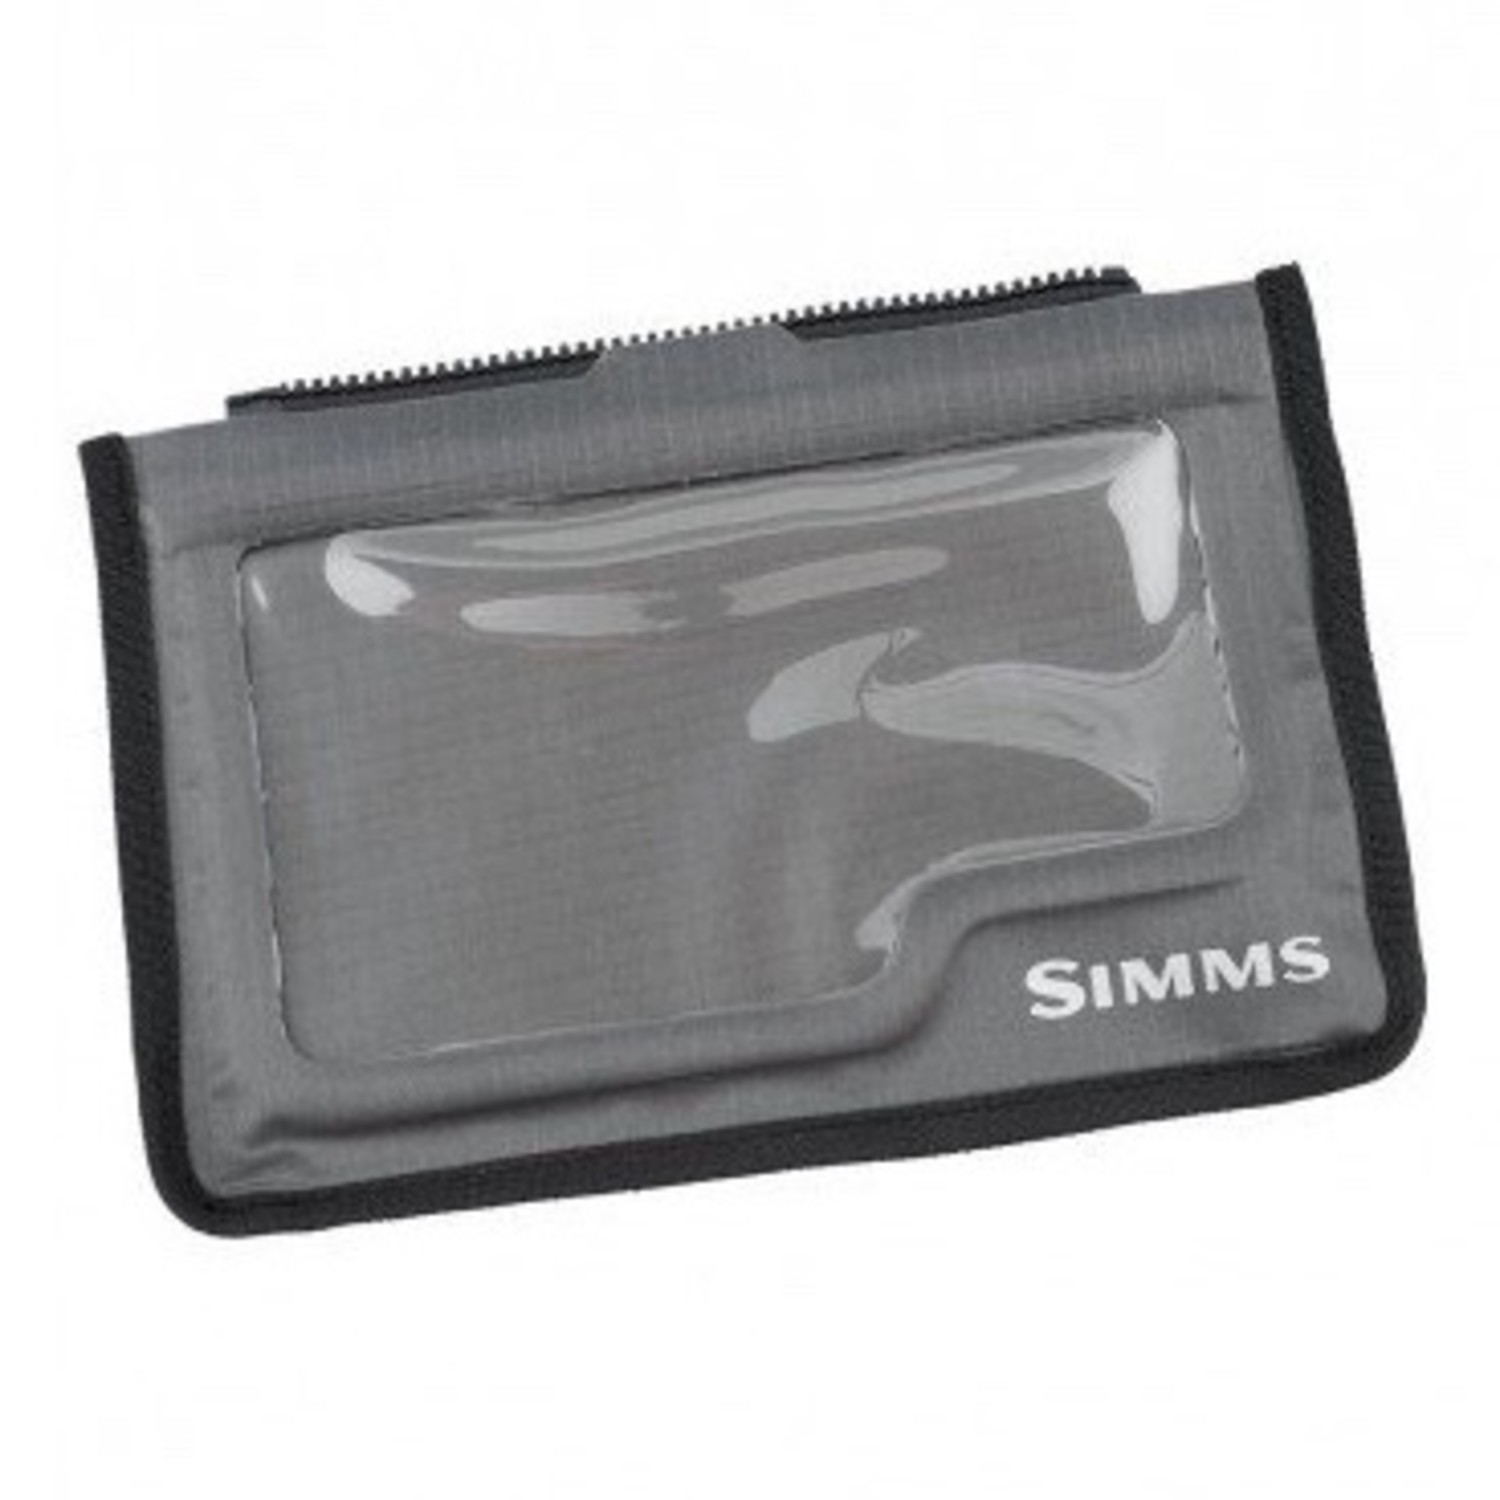 Simms Simms Waterproof Wader Pouch - Royal Treatment Fly Fishing